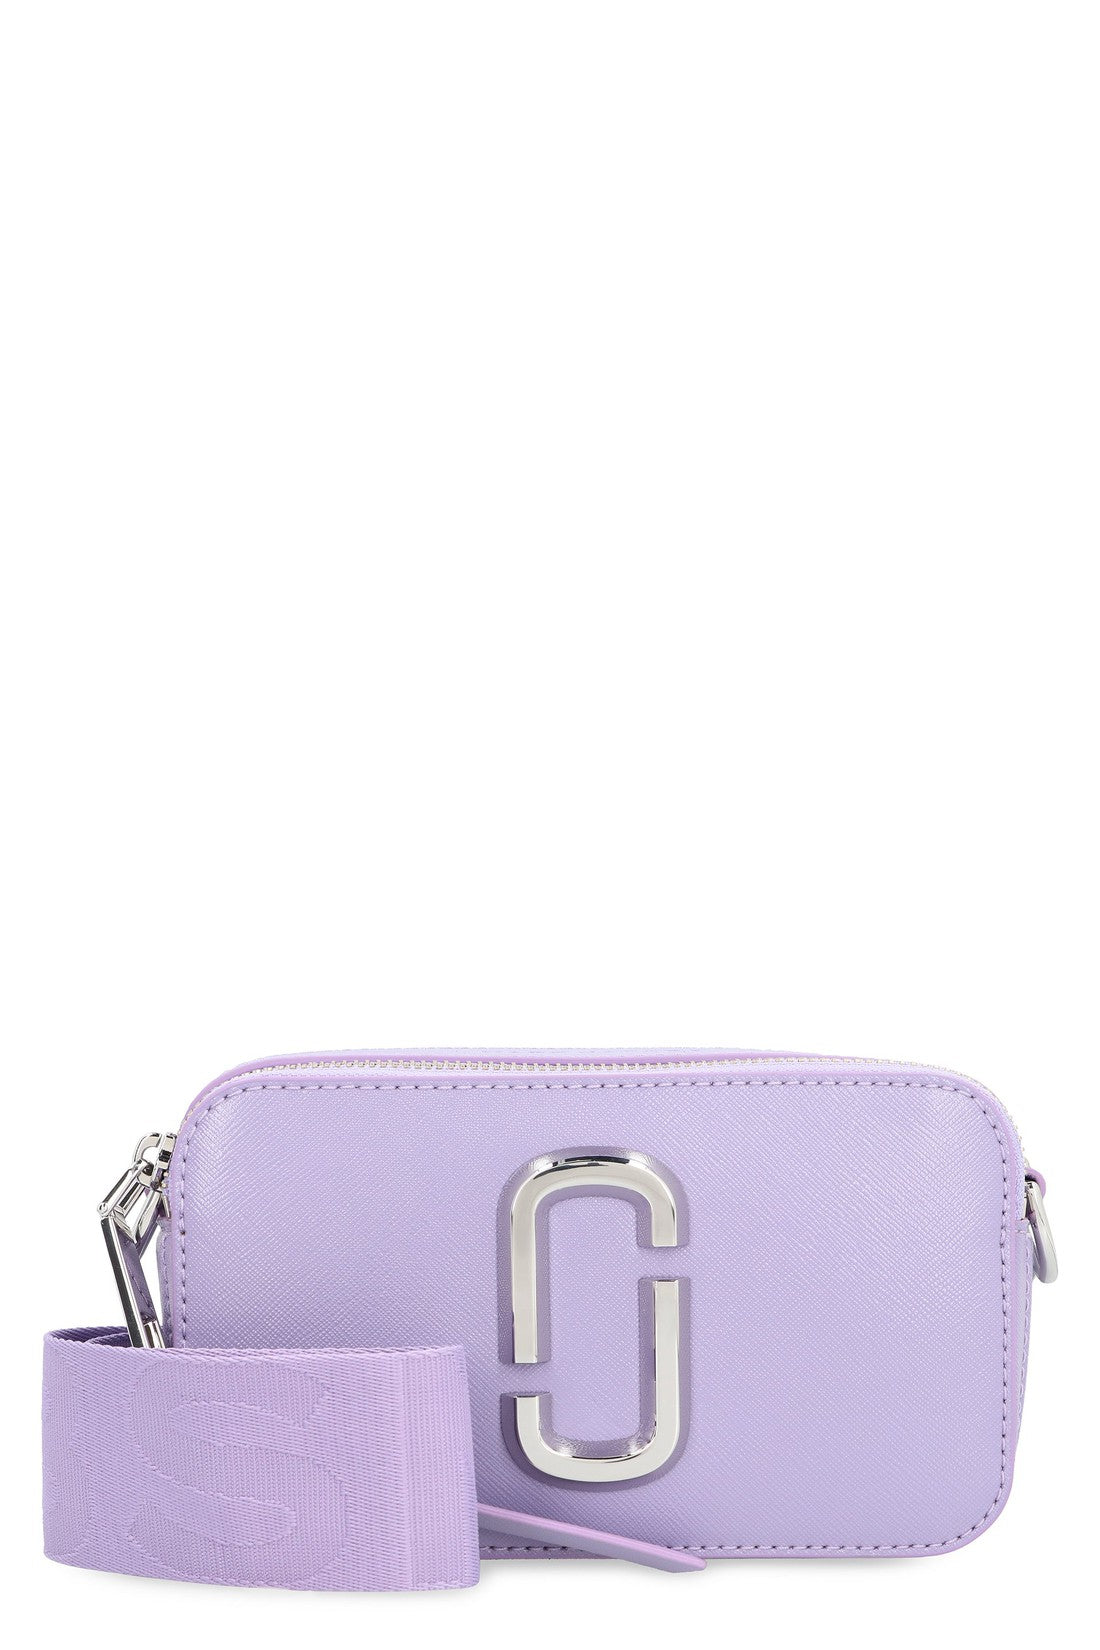 Marc Jacobs-OUTLET-SALE-The Utility Snapshot leather camera bag-ARCHIVIST